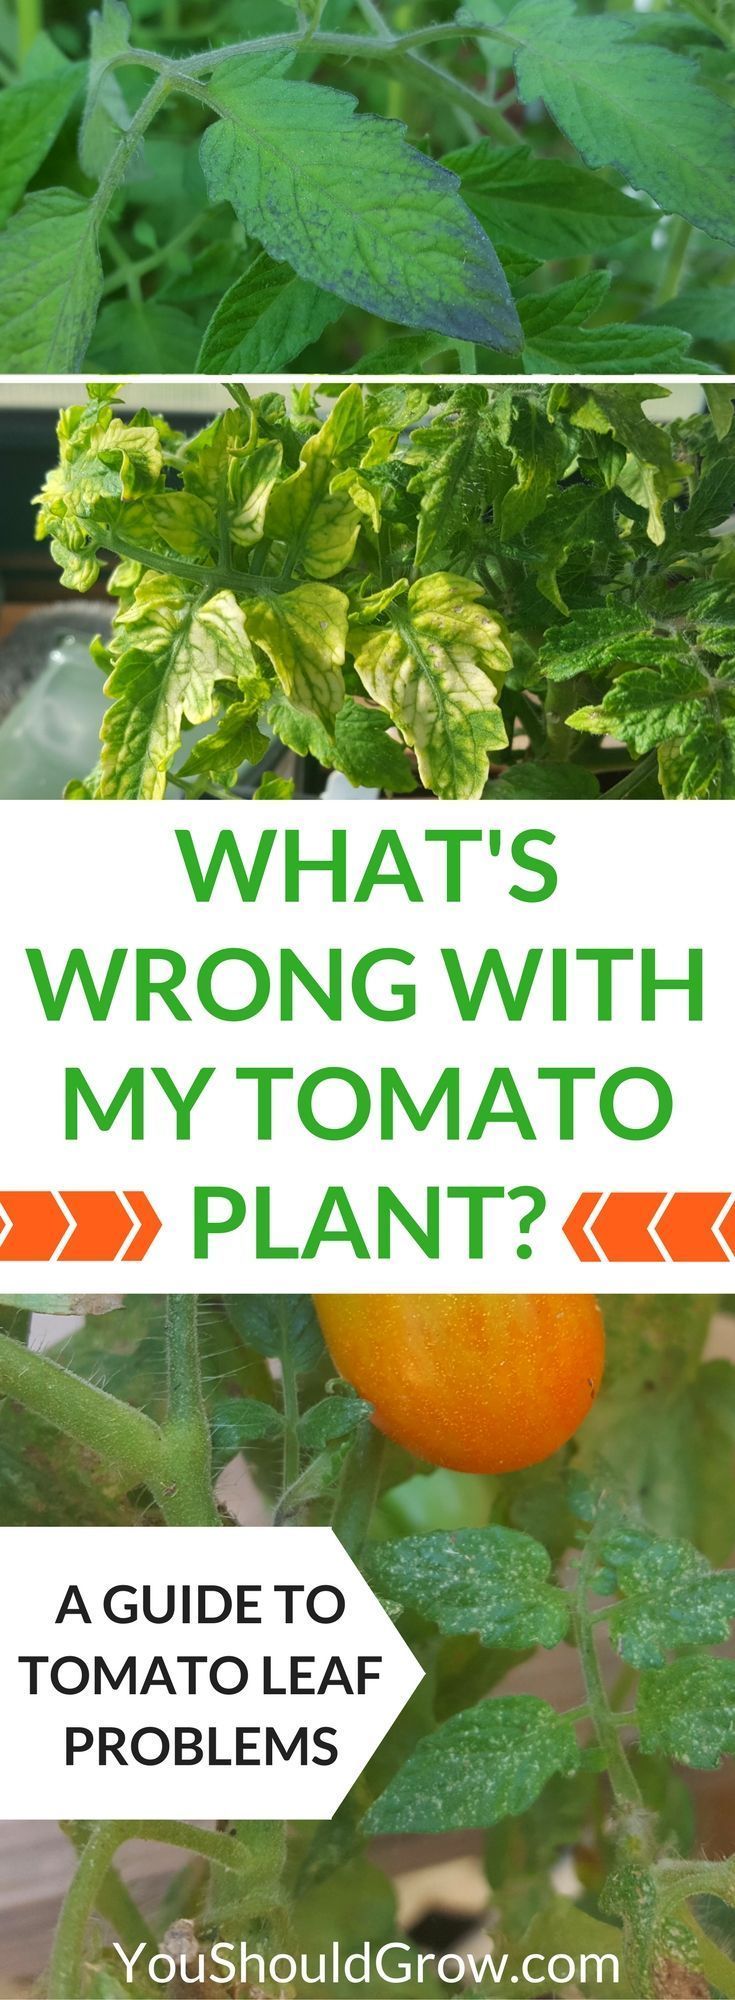 Why are your tomatos leaves yellow, spotty, or wilted? Homegrown tomatoes at home can suffer from a variety of pest and disease